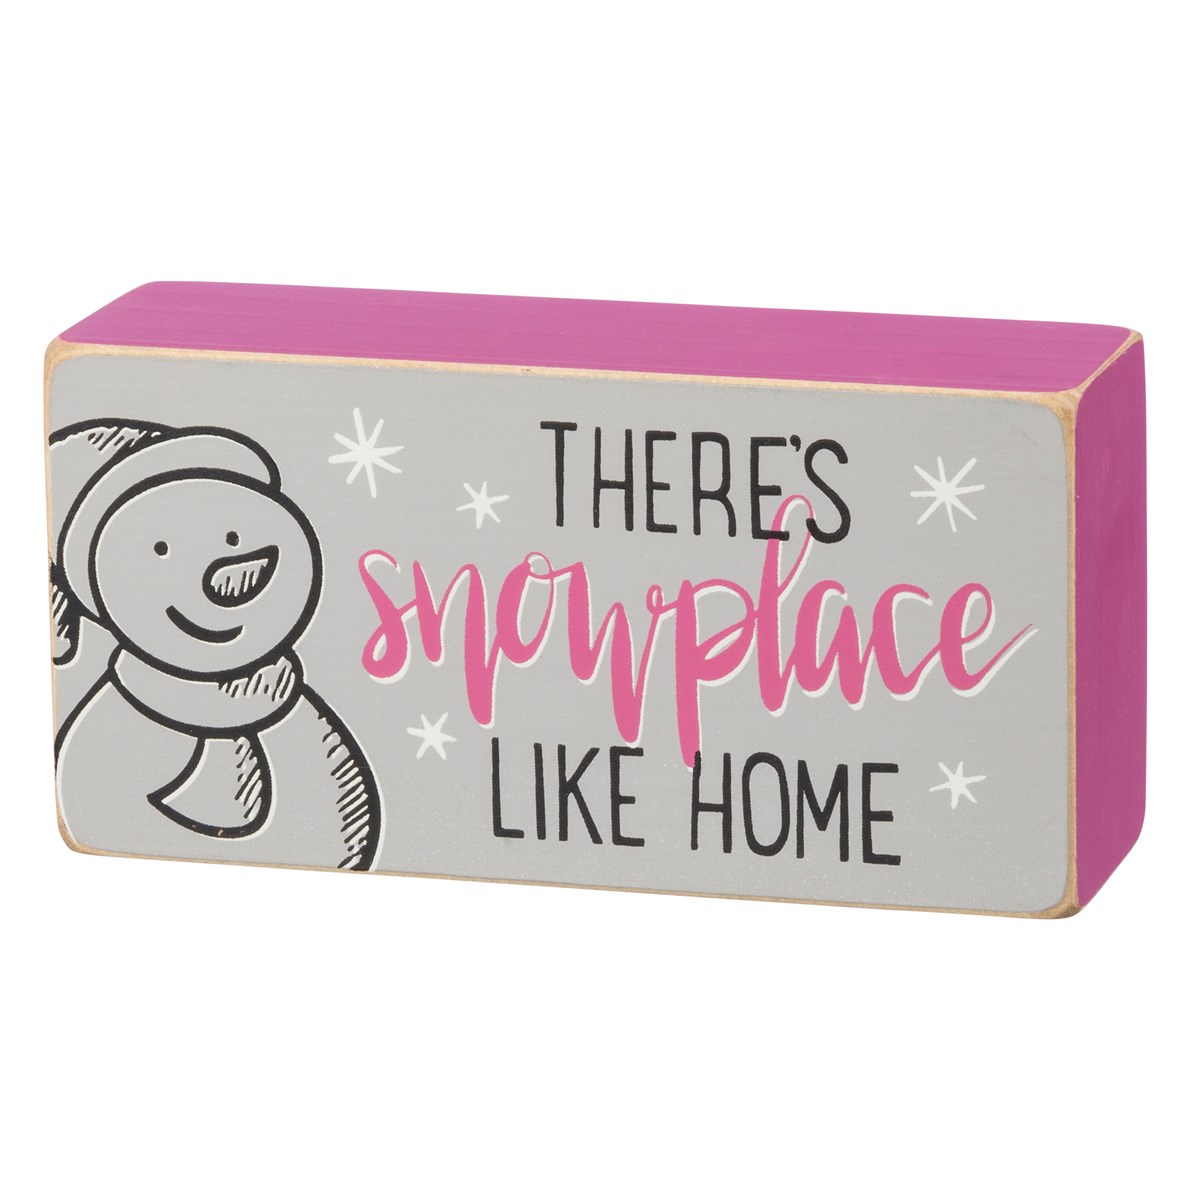 Snowplace Like Home Box Sign - Wood